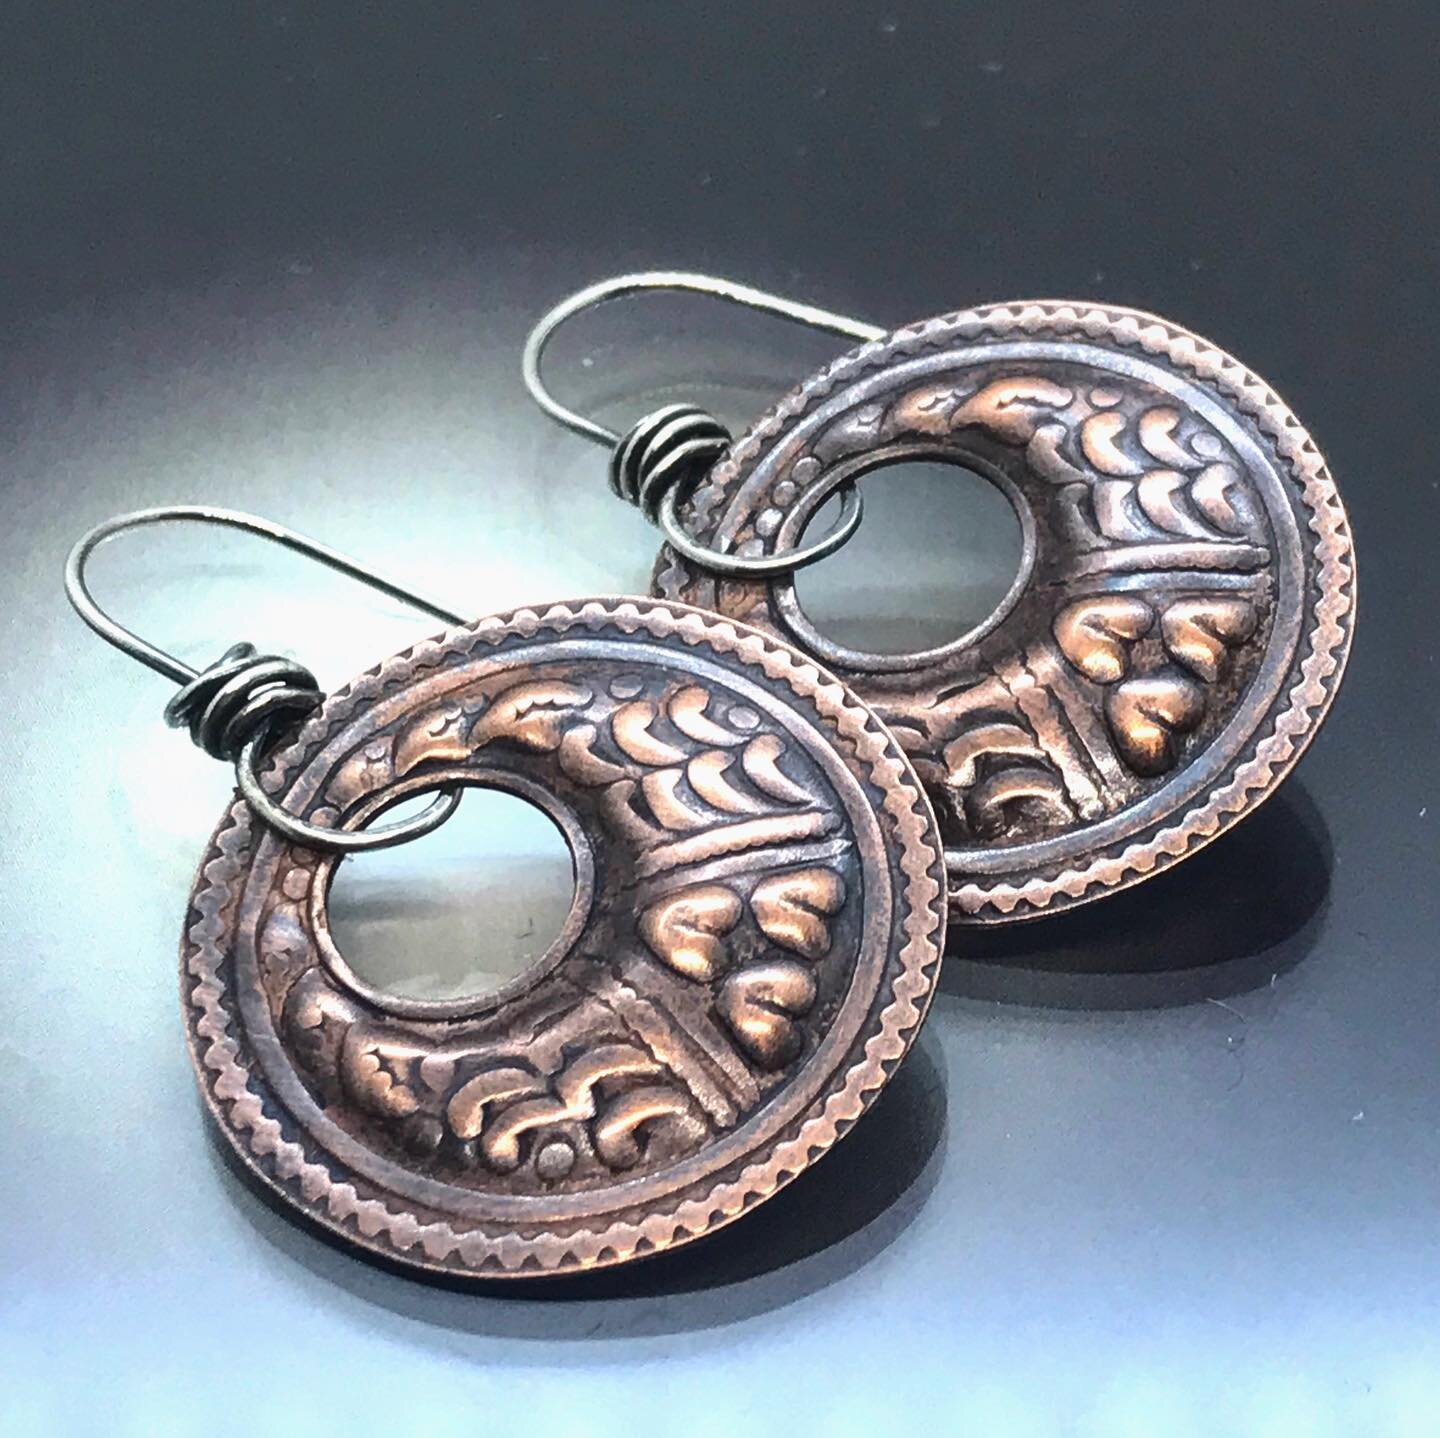 CB&amp;CO
.
Copper and sterling pressed earrings. Hand wrapped sterling ear wires.
$36
.
#copperearrings #20tonpress #riojewelers #handmade #circleearrings #MNmade